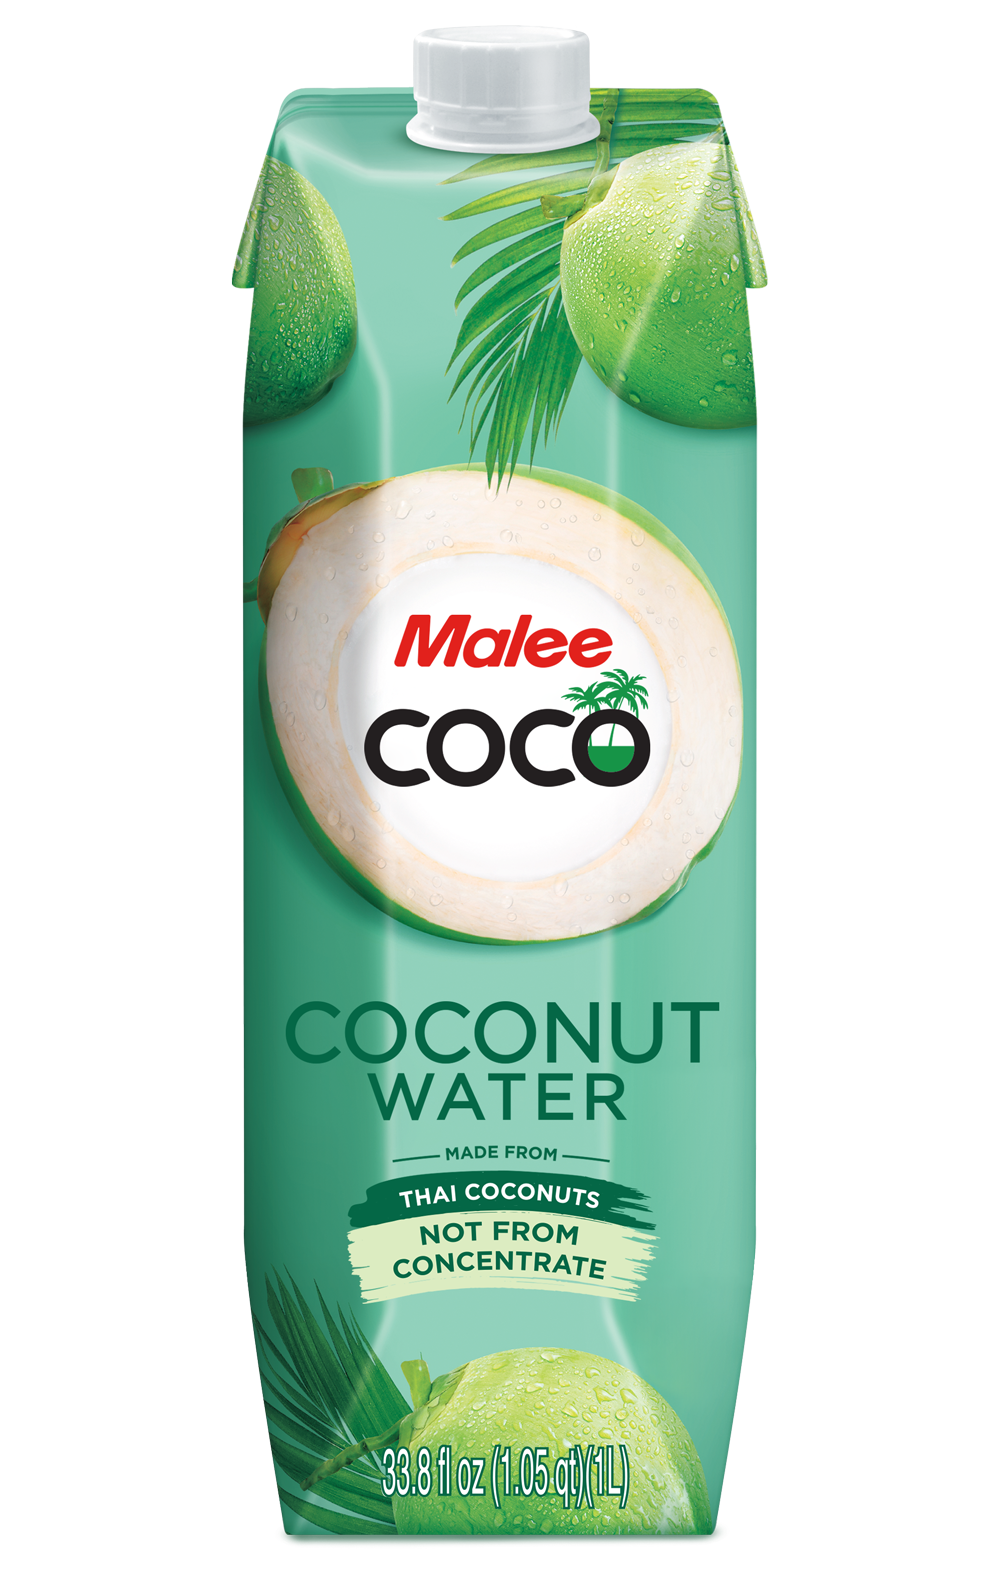 Featuring: Malee Coconut Water Packs